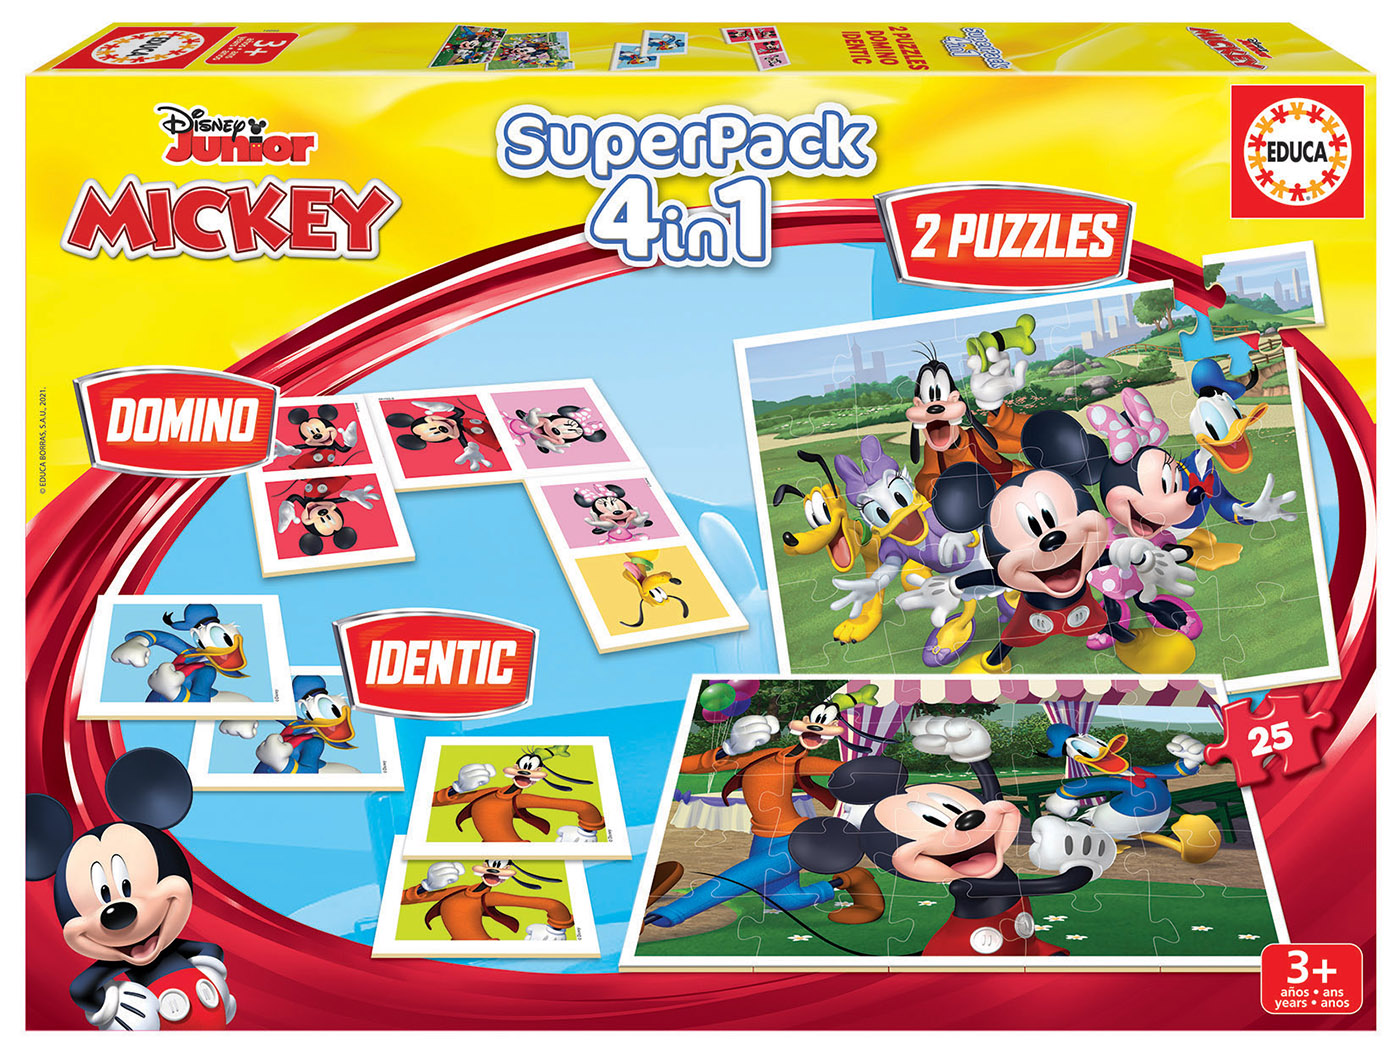 MINNIE MOUSE EDUCATIONAL MEMORY GAME PUZZLE MEMO GAME 